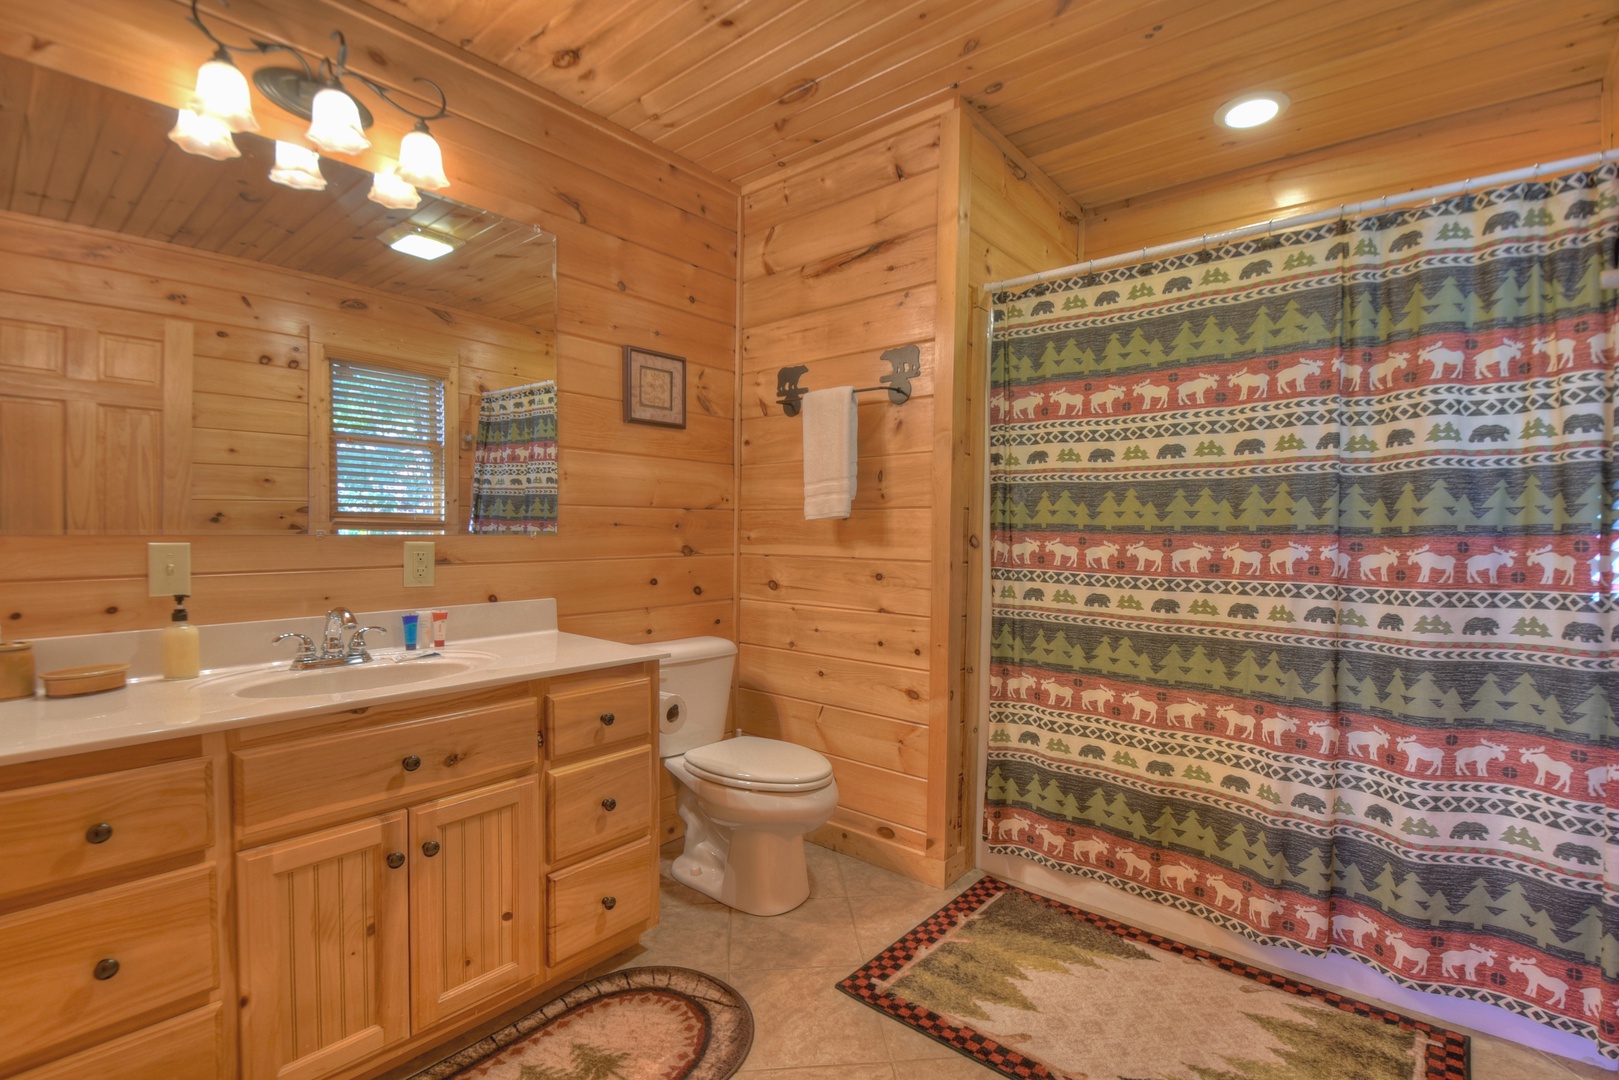 Sunrock Mountain Hideaway- Full bath with step up shower on the middle level